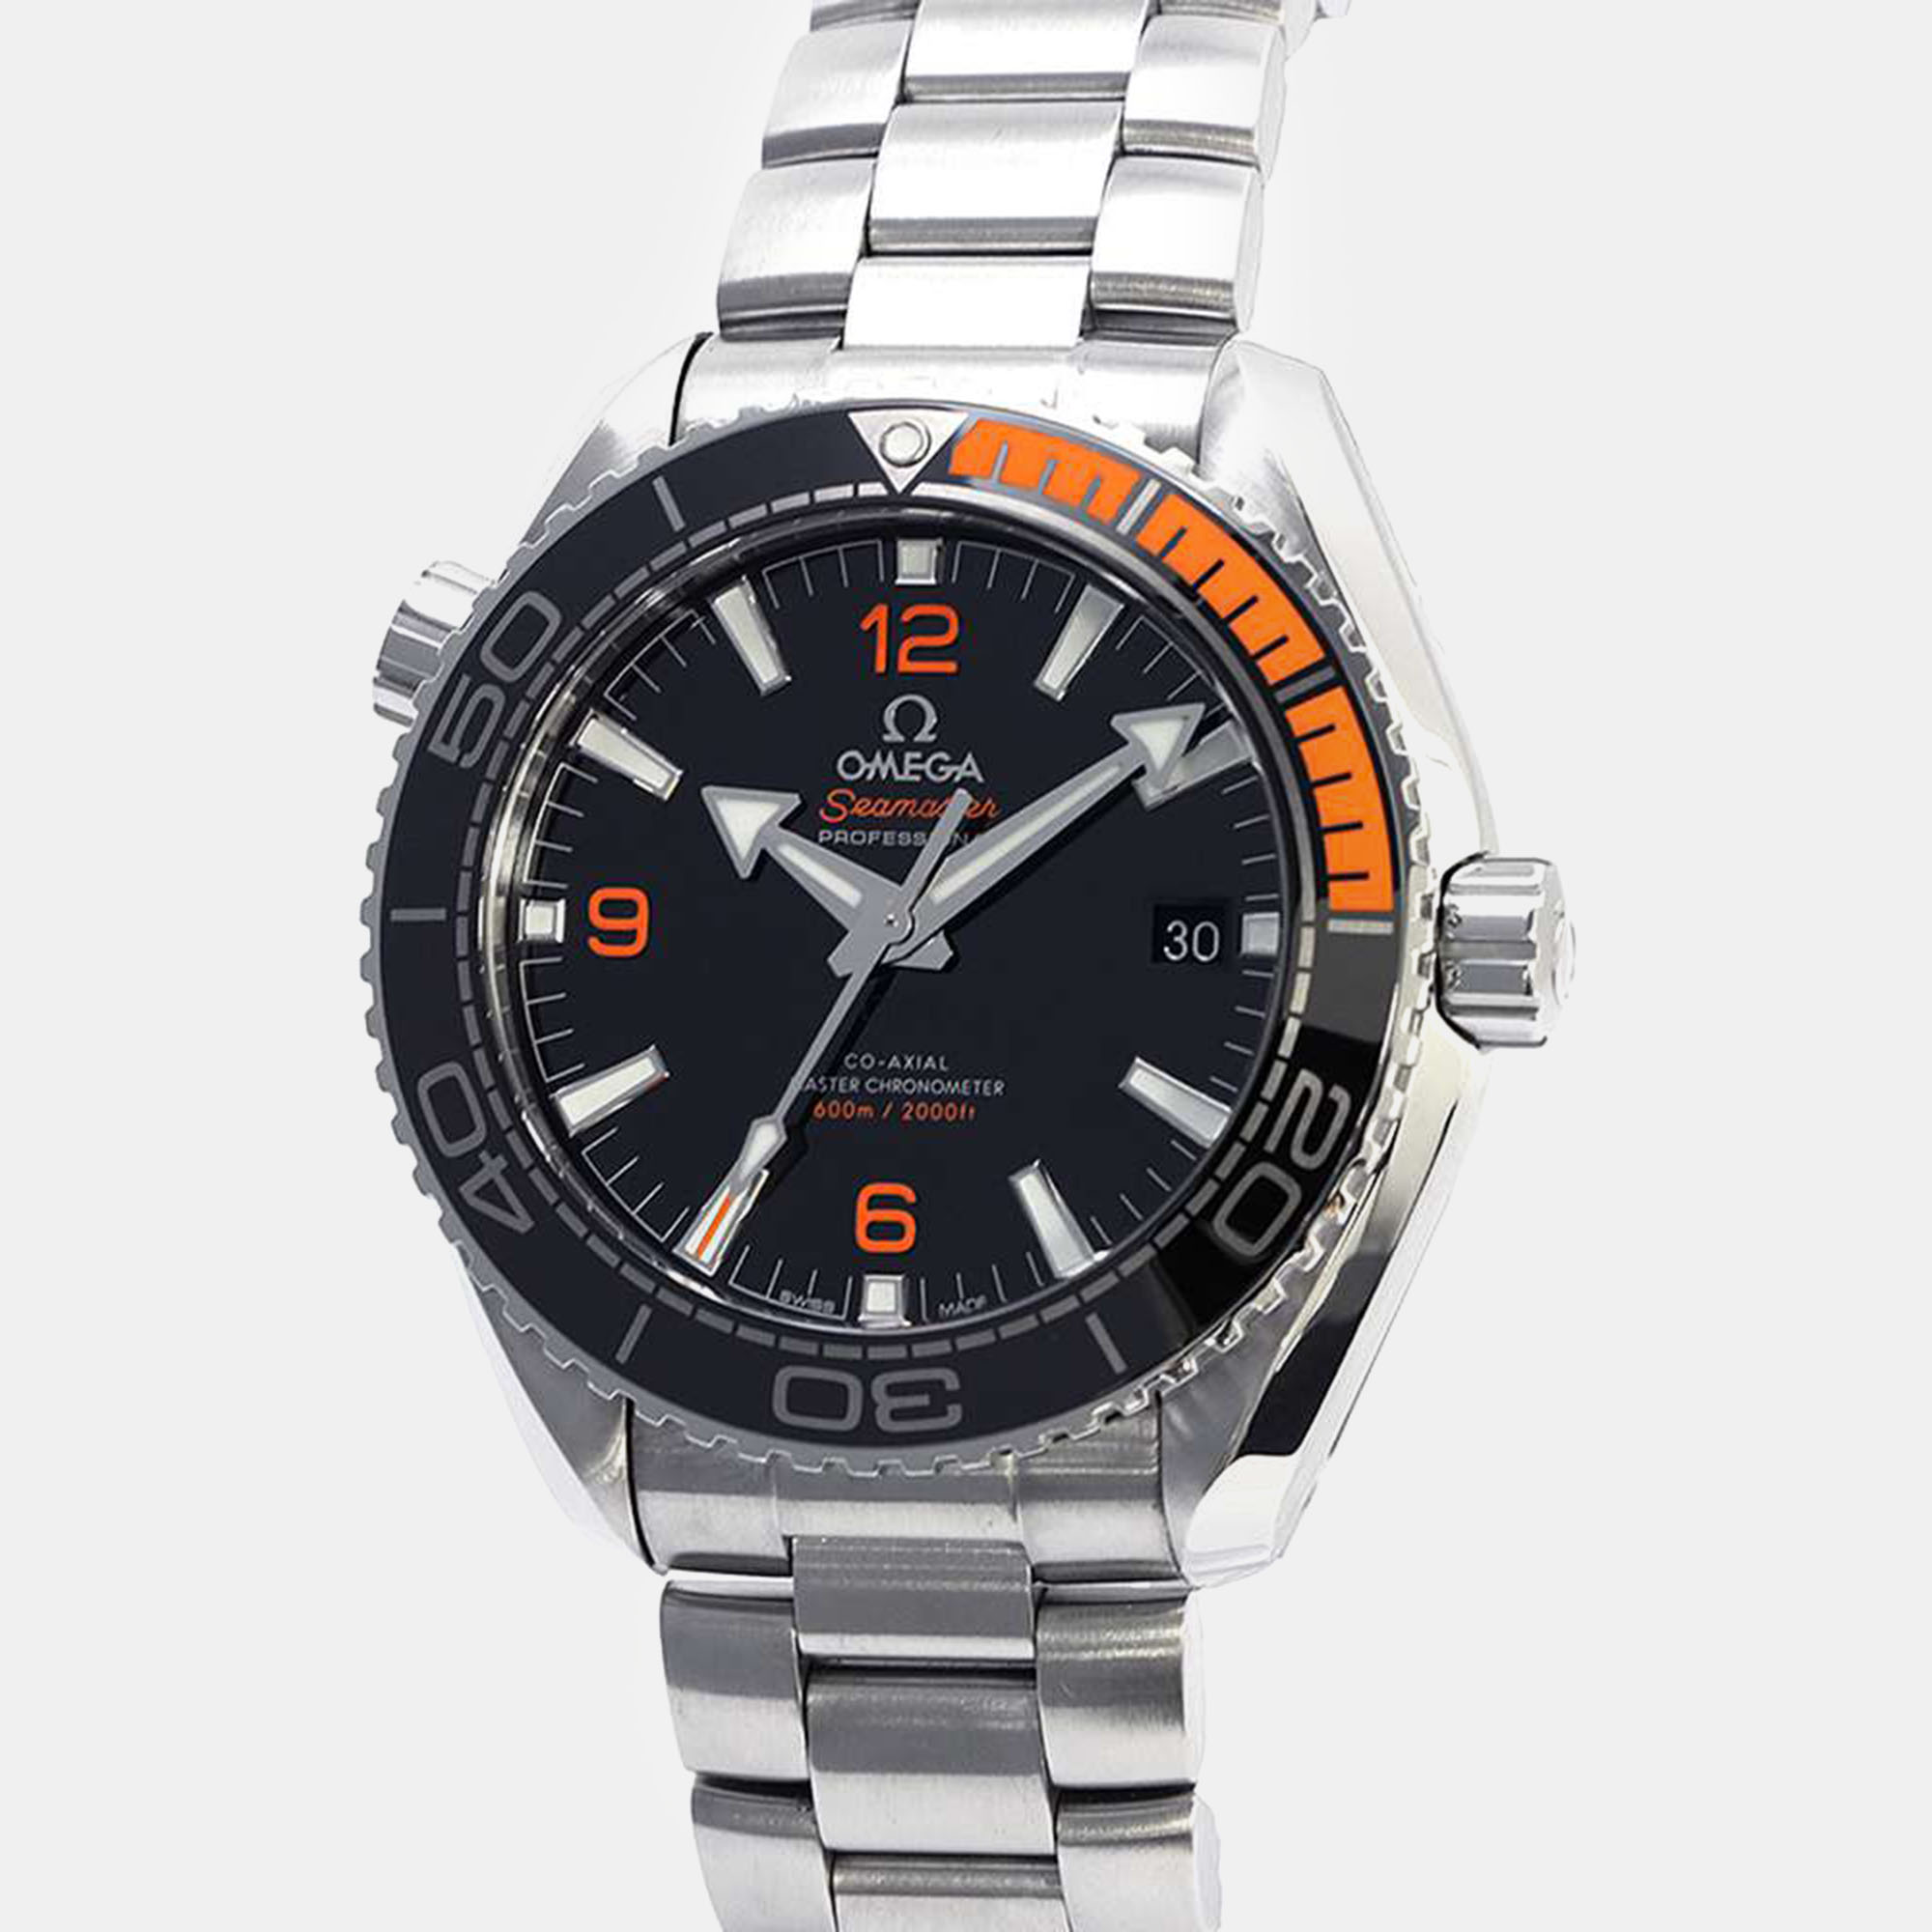 Omega black stainless steel seamaster planet ocean 215.30.44.21.01.002 automatic men's wristwatch 39.5 mm